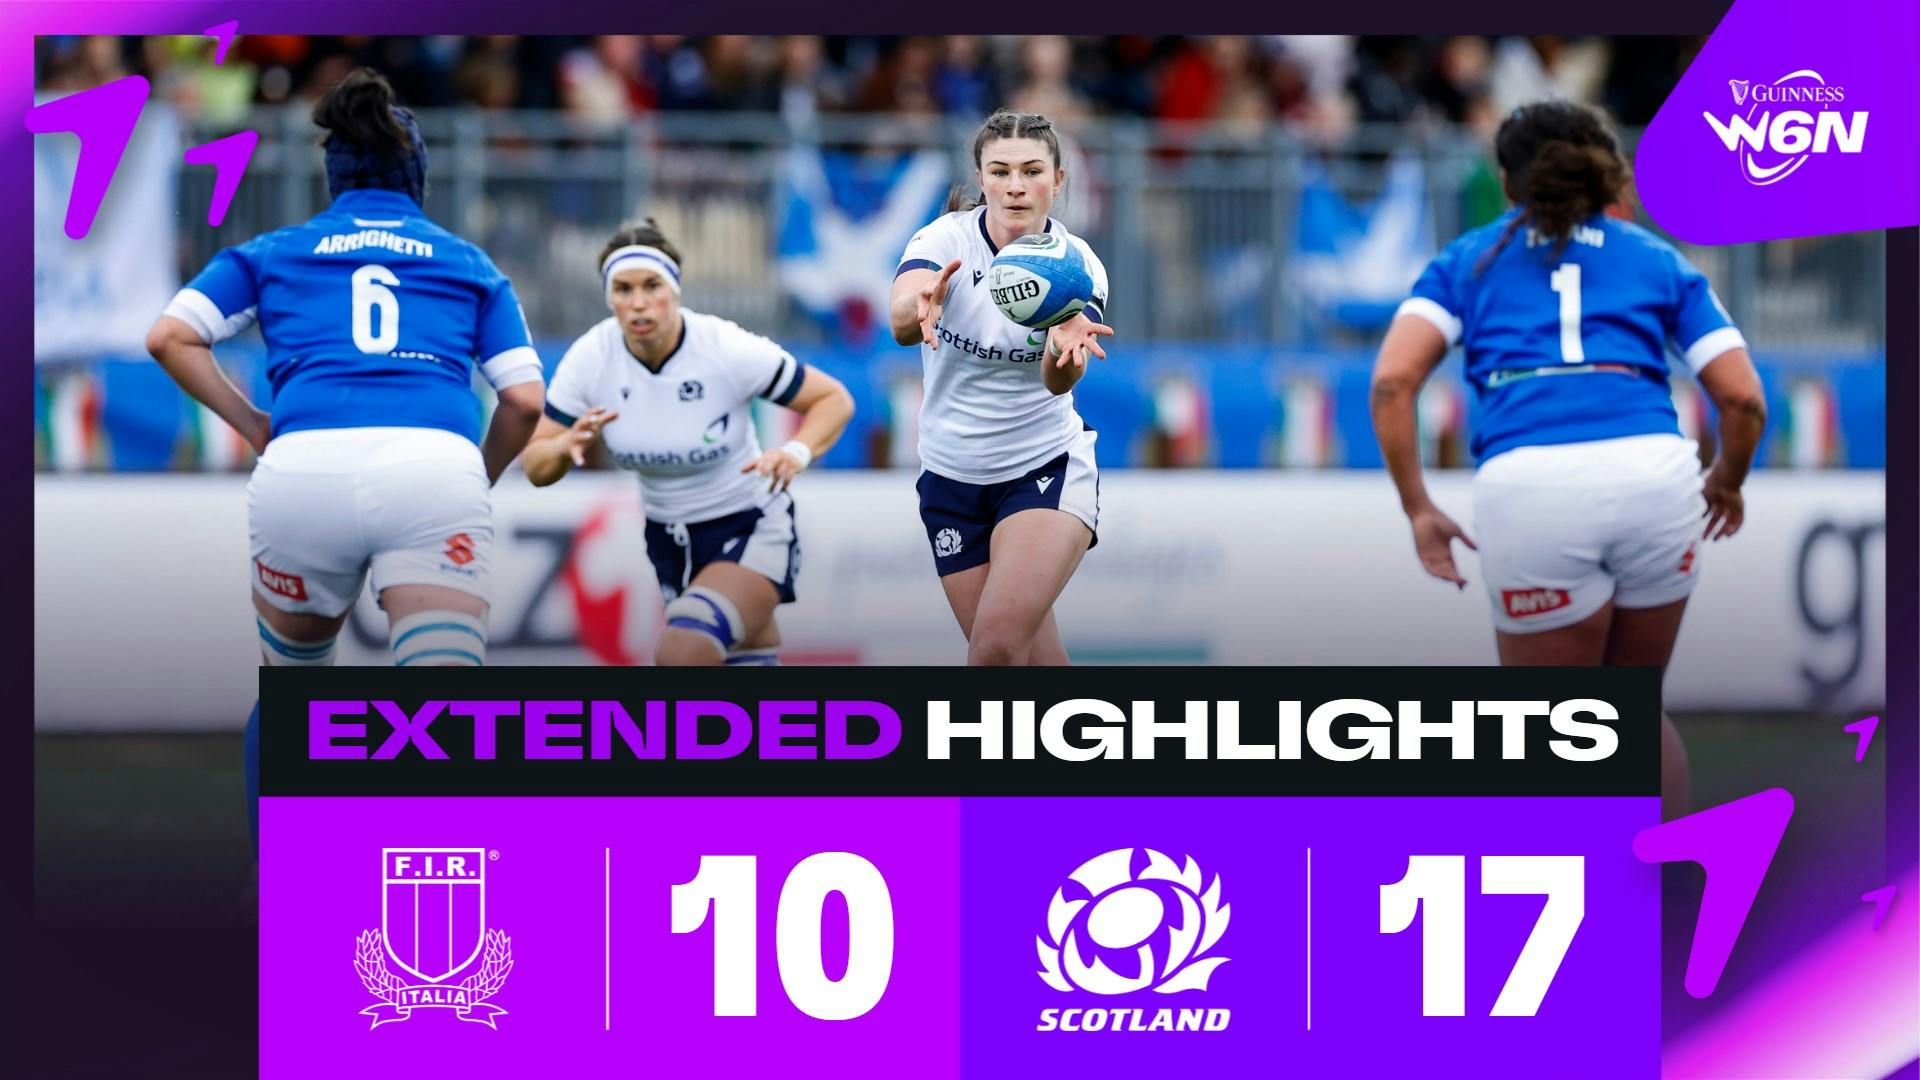 EXTENDED HIGHLIGHTS | GUINNESS WOMEN'S SIX NATIONS | ITALY V SCOTLAND